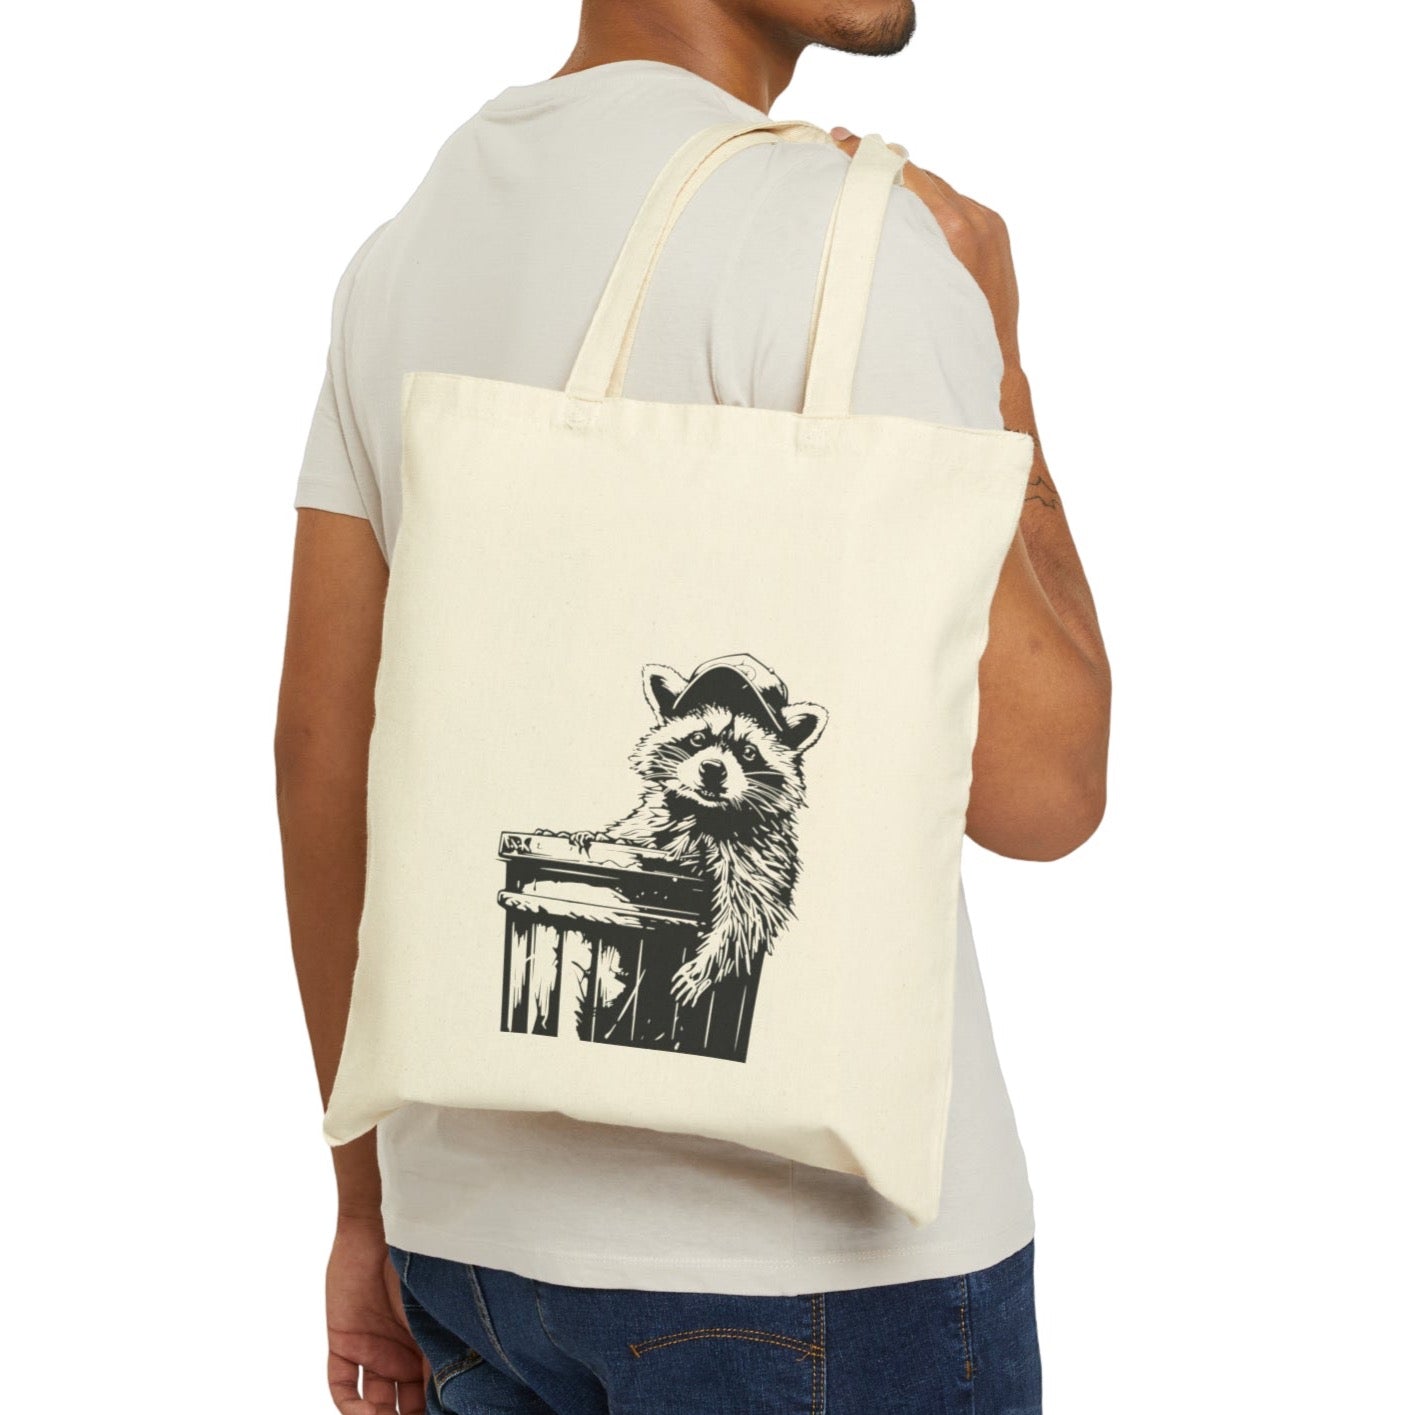 Ricky The Raccoon -  Canvas Tote Bag